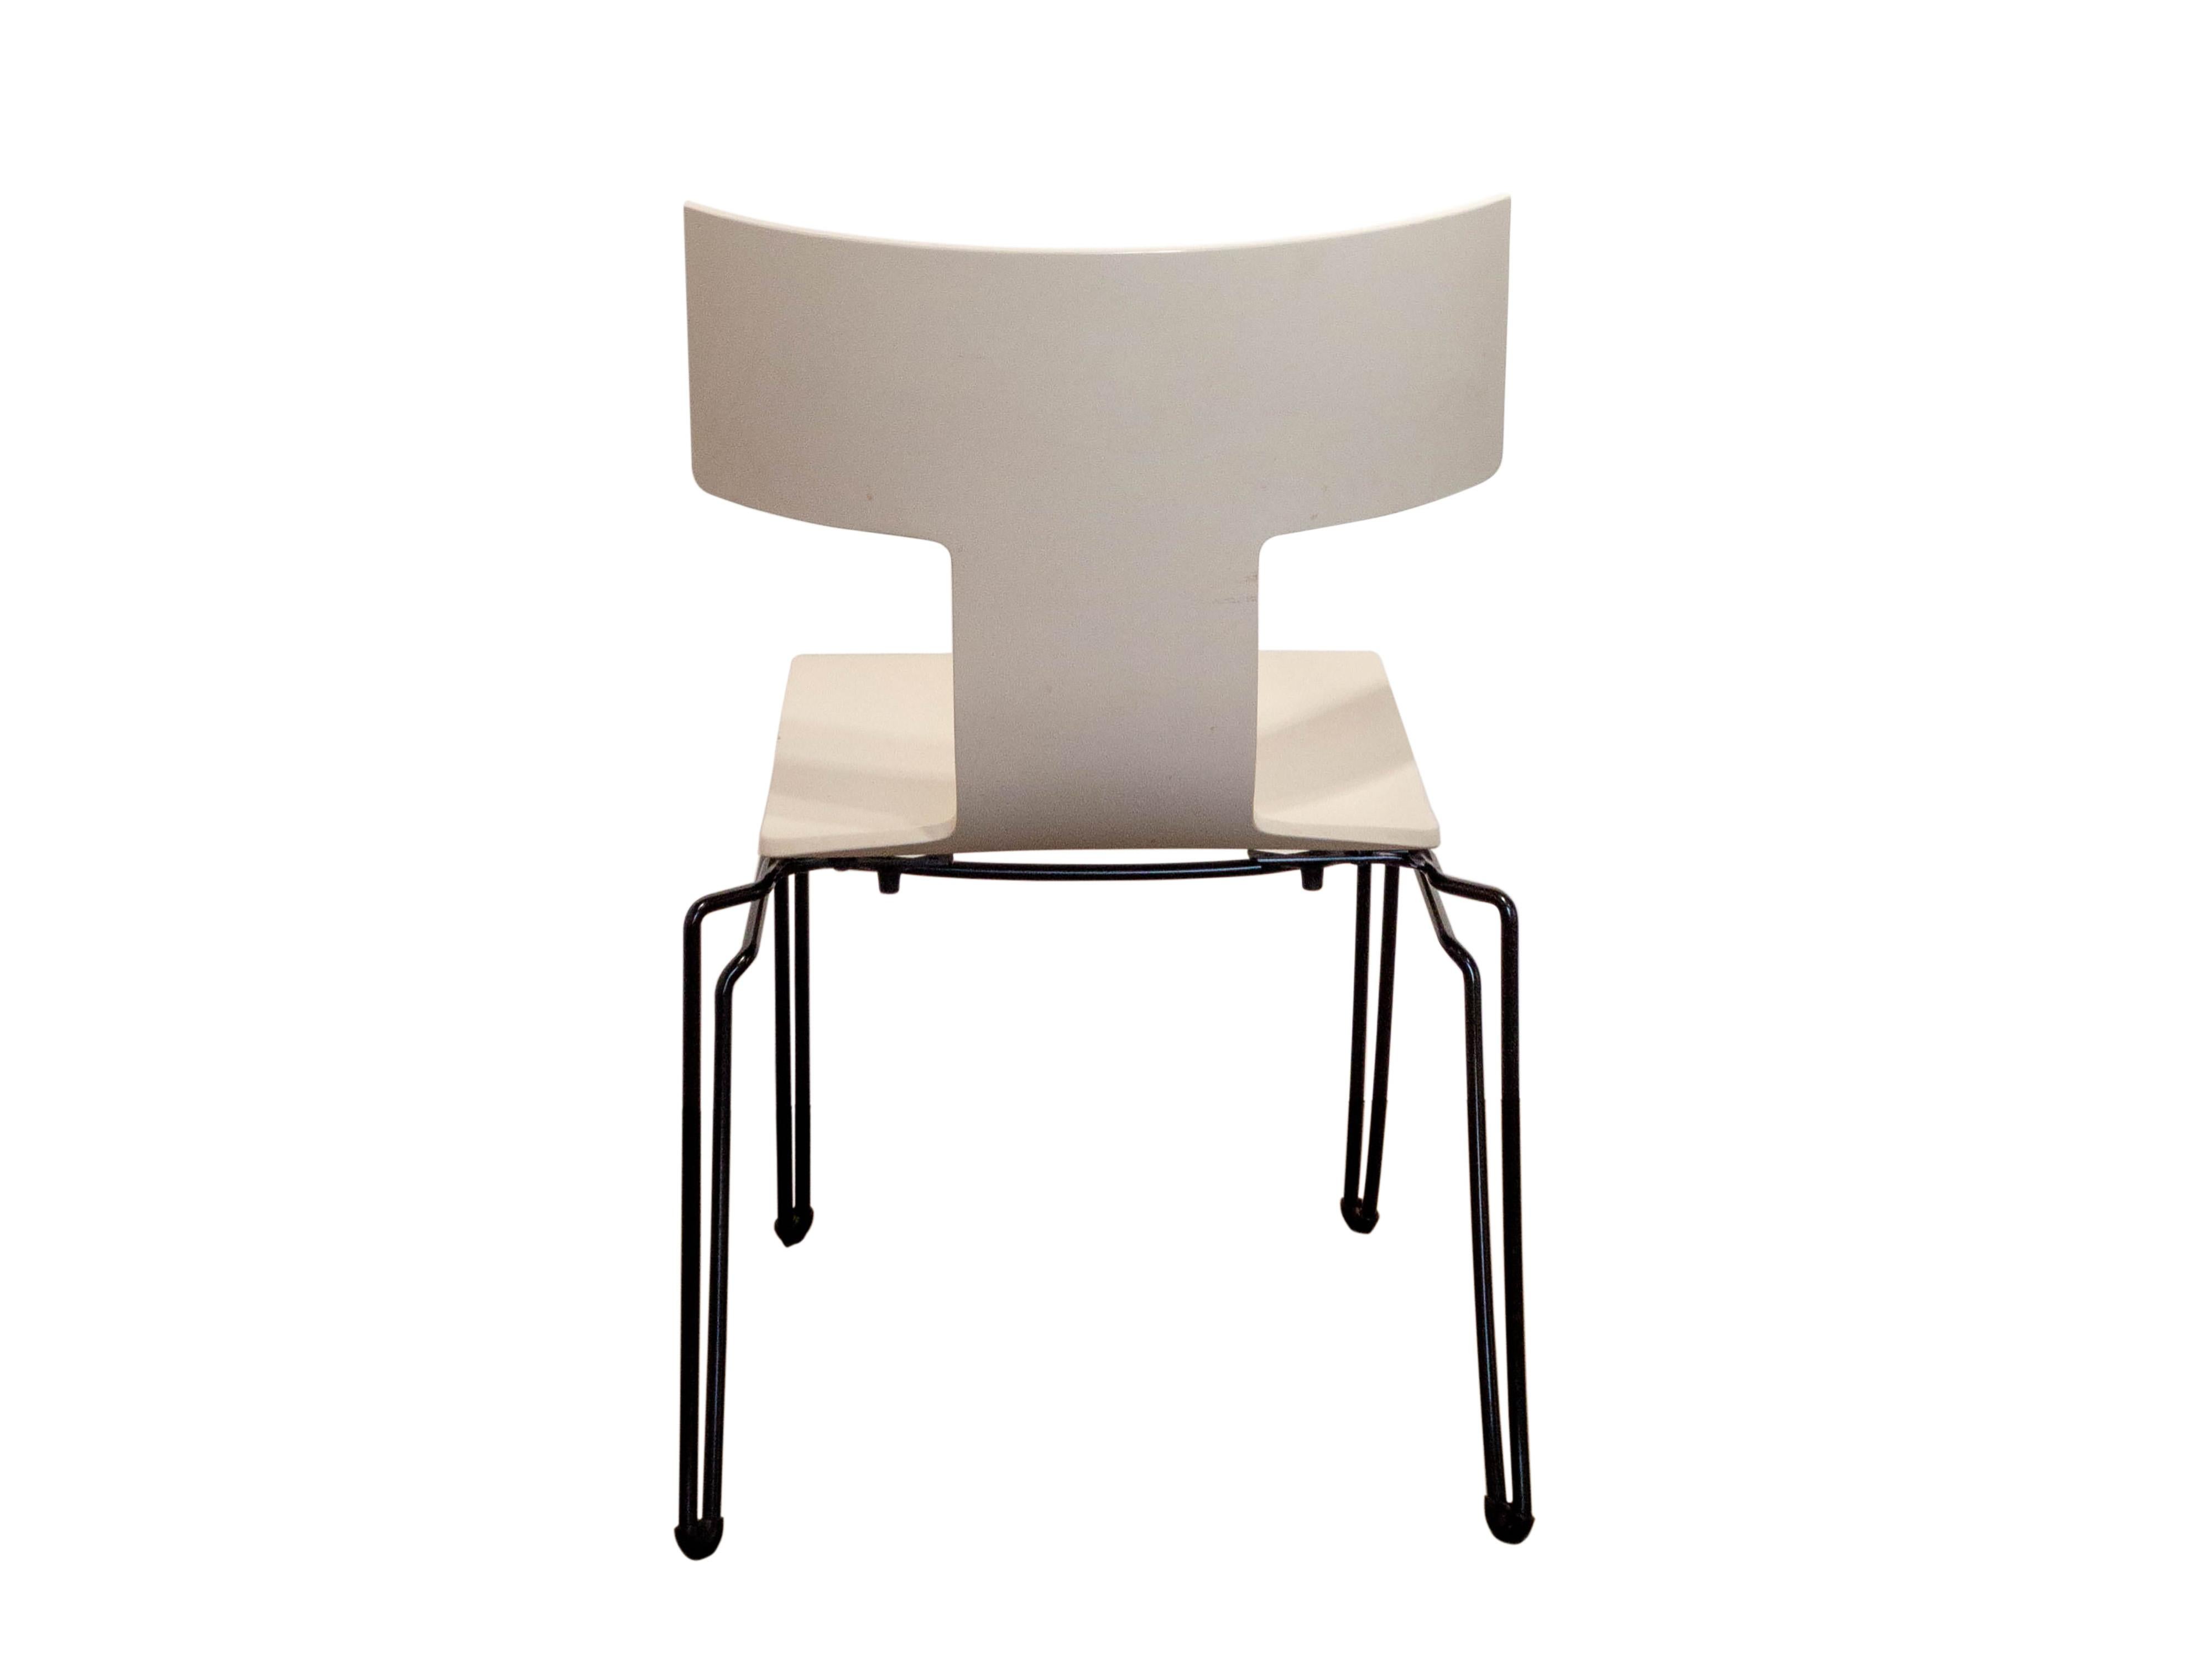 American Set of 8 White Anziano Chairs by John Hutton for Donghia